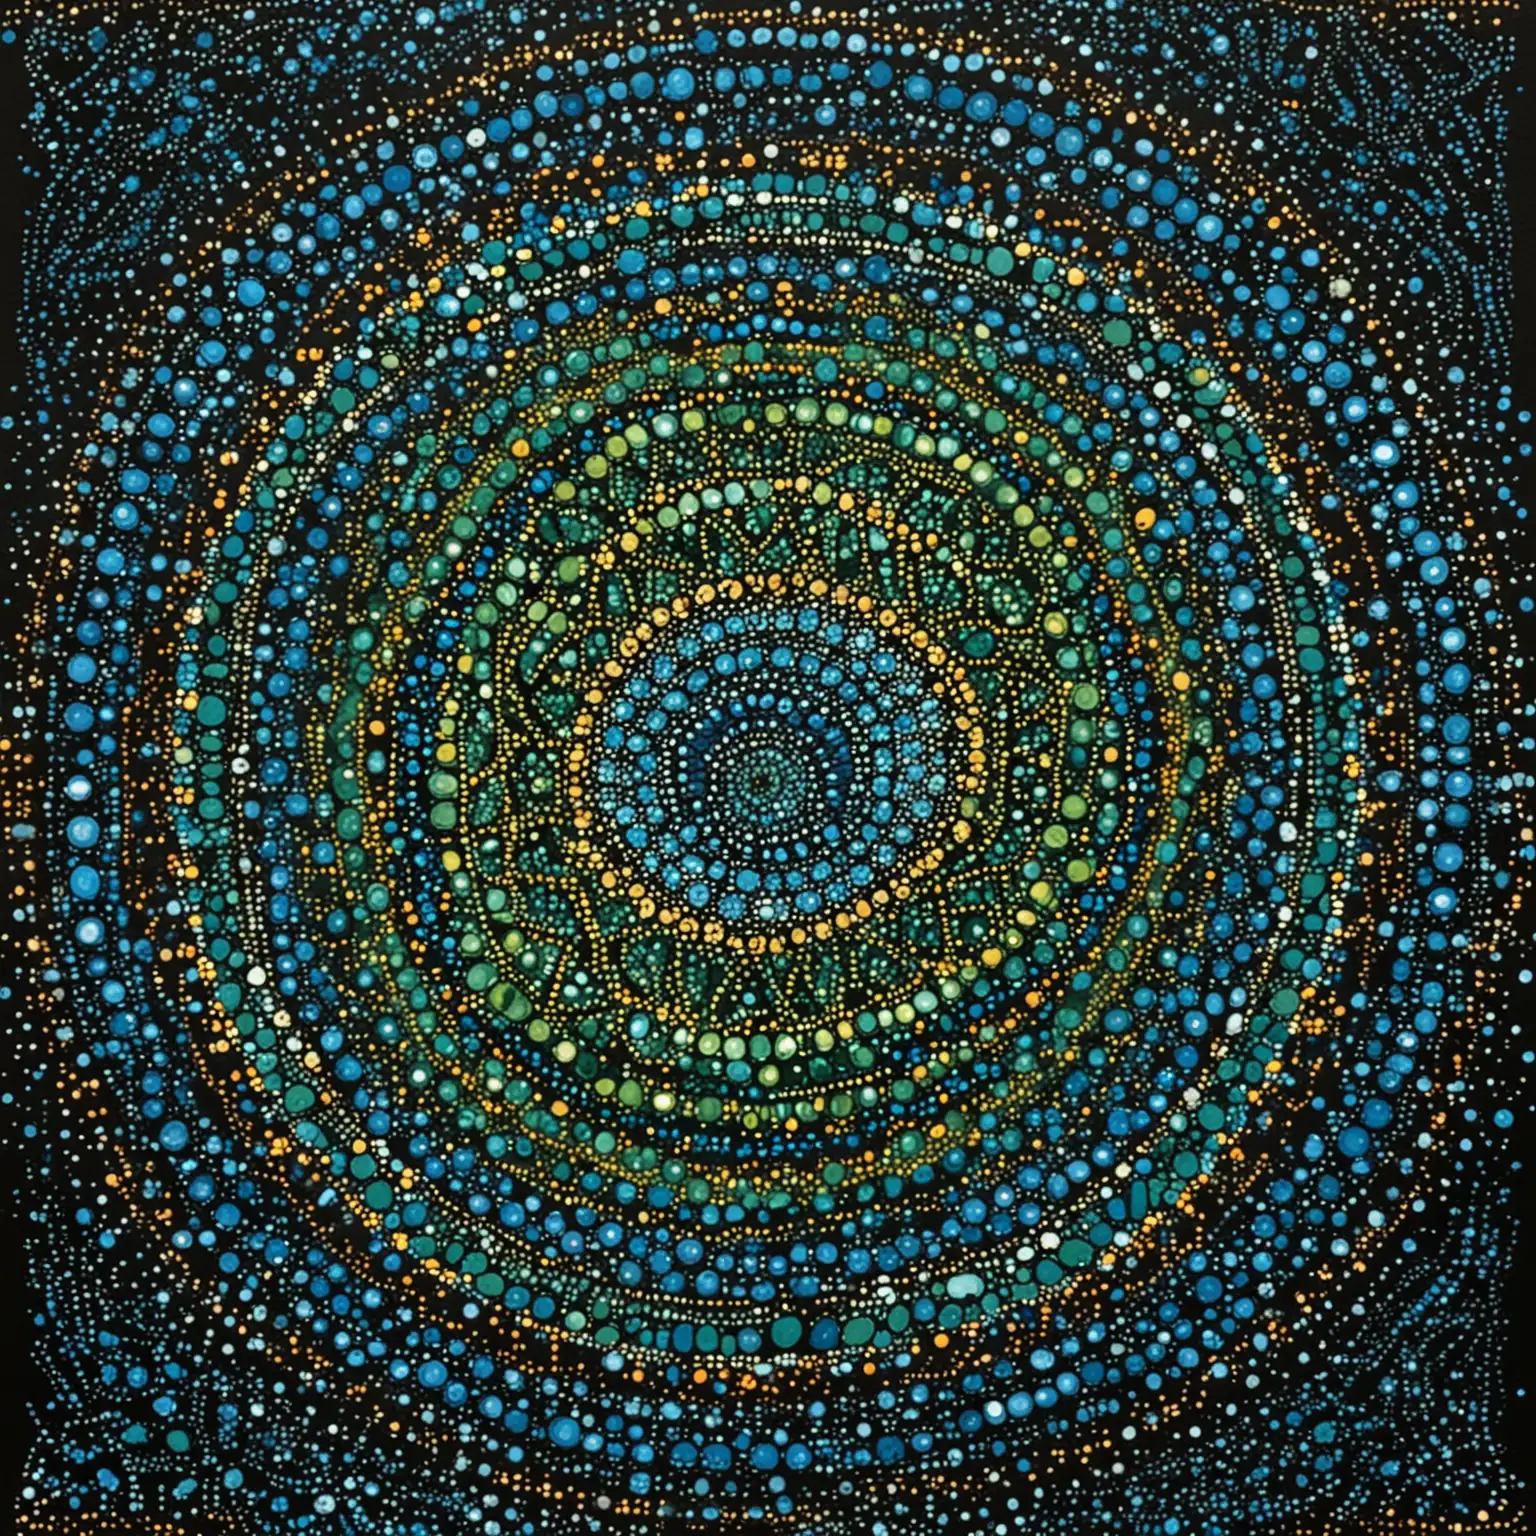  aboriginal dot art style of mandala with green,  blue, and black
Dots only